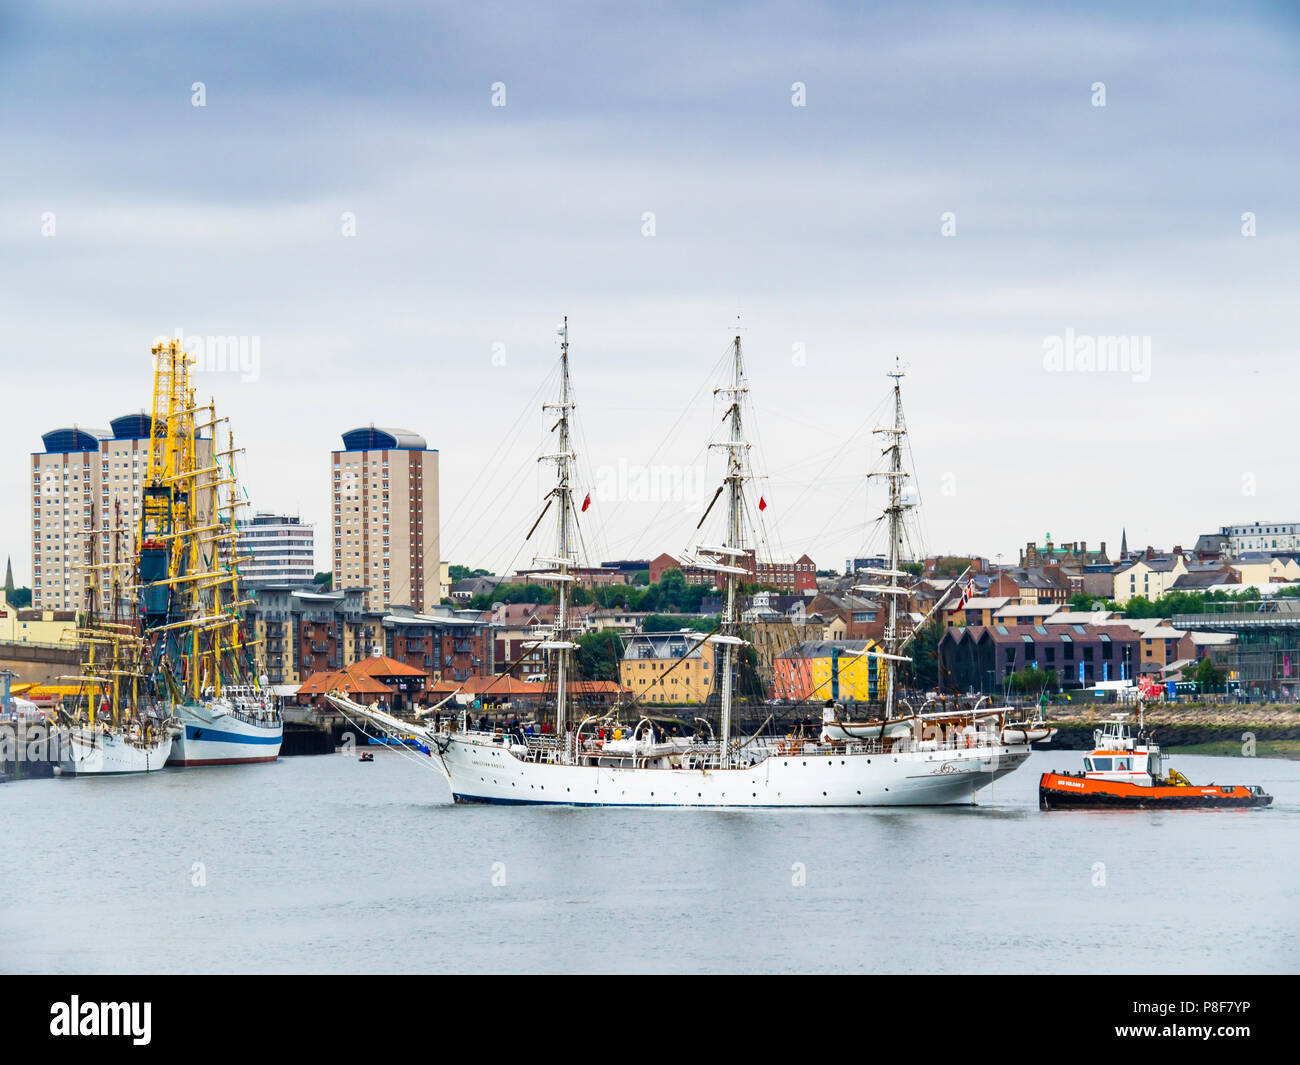 The Norwegian Full rigged three masted sail training ship Christian Radich arriving in Roker Harbour Sunderland for the Tall Ships Race 2018 Stock Photo